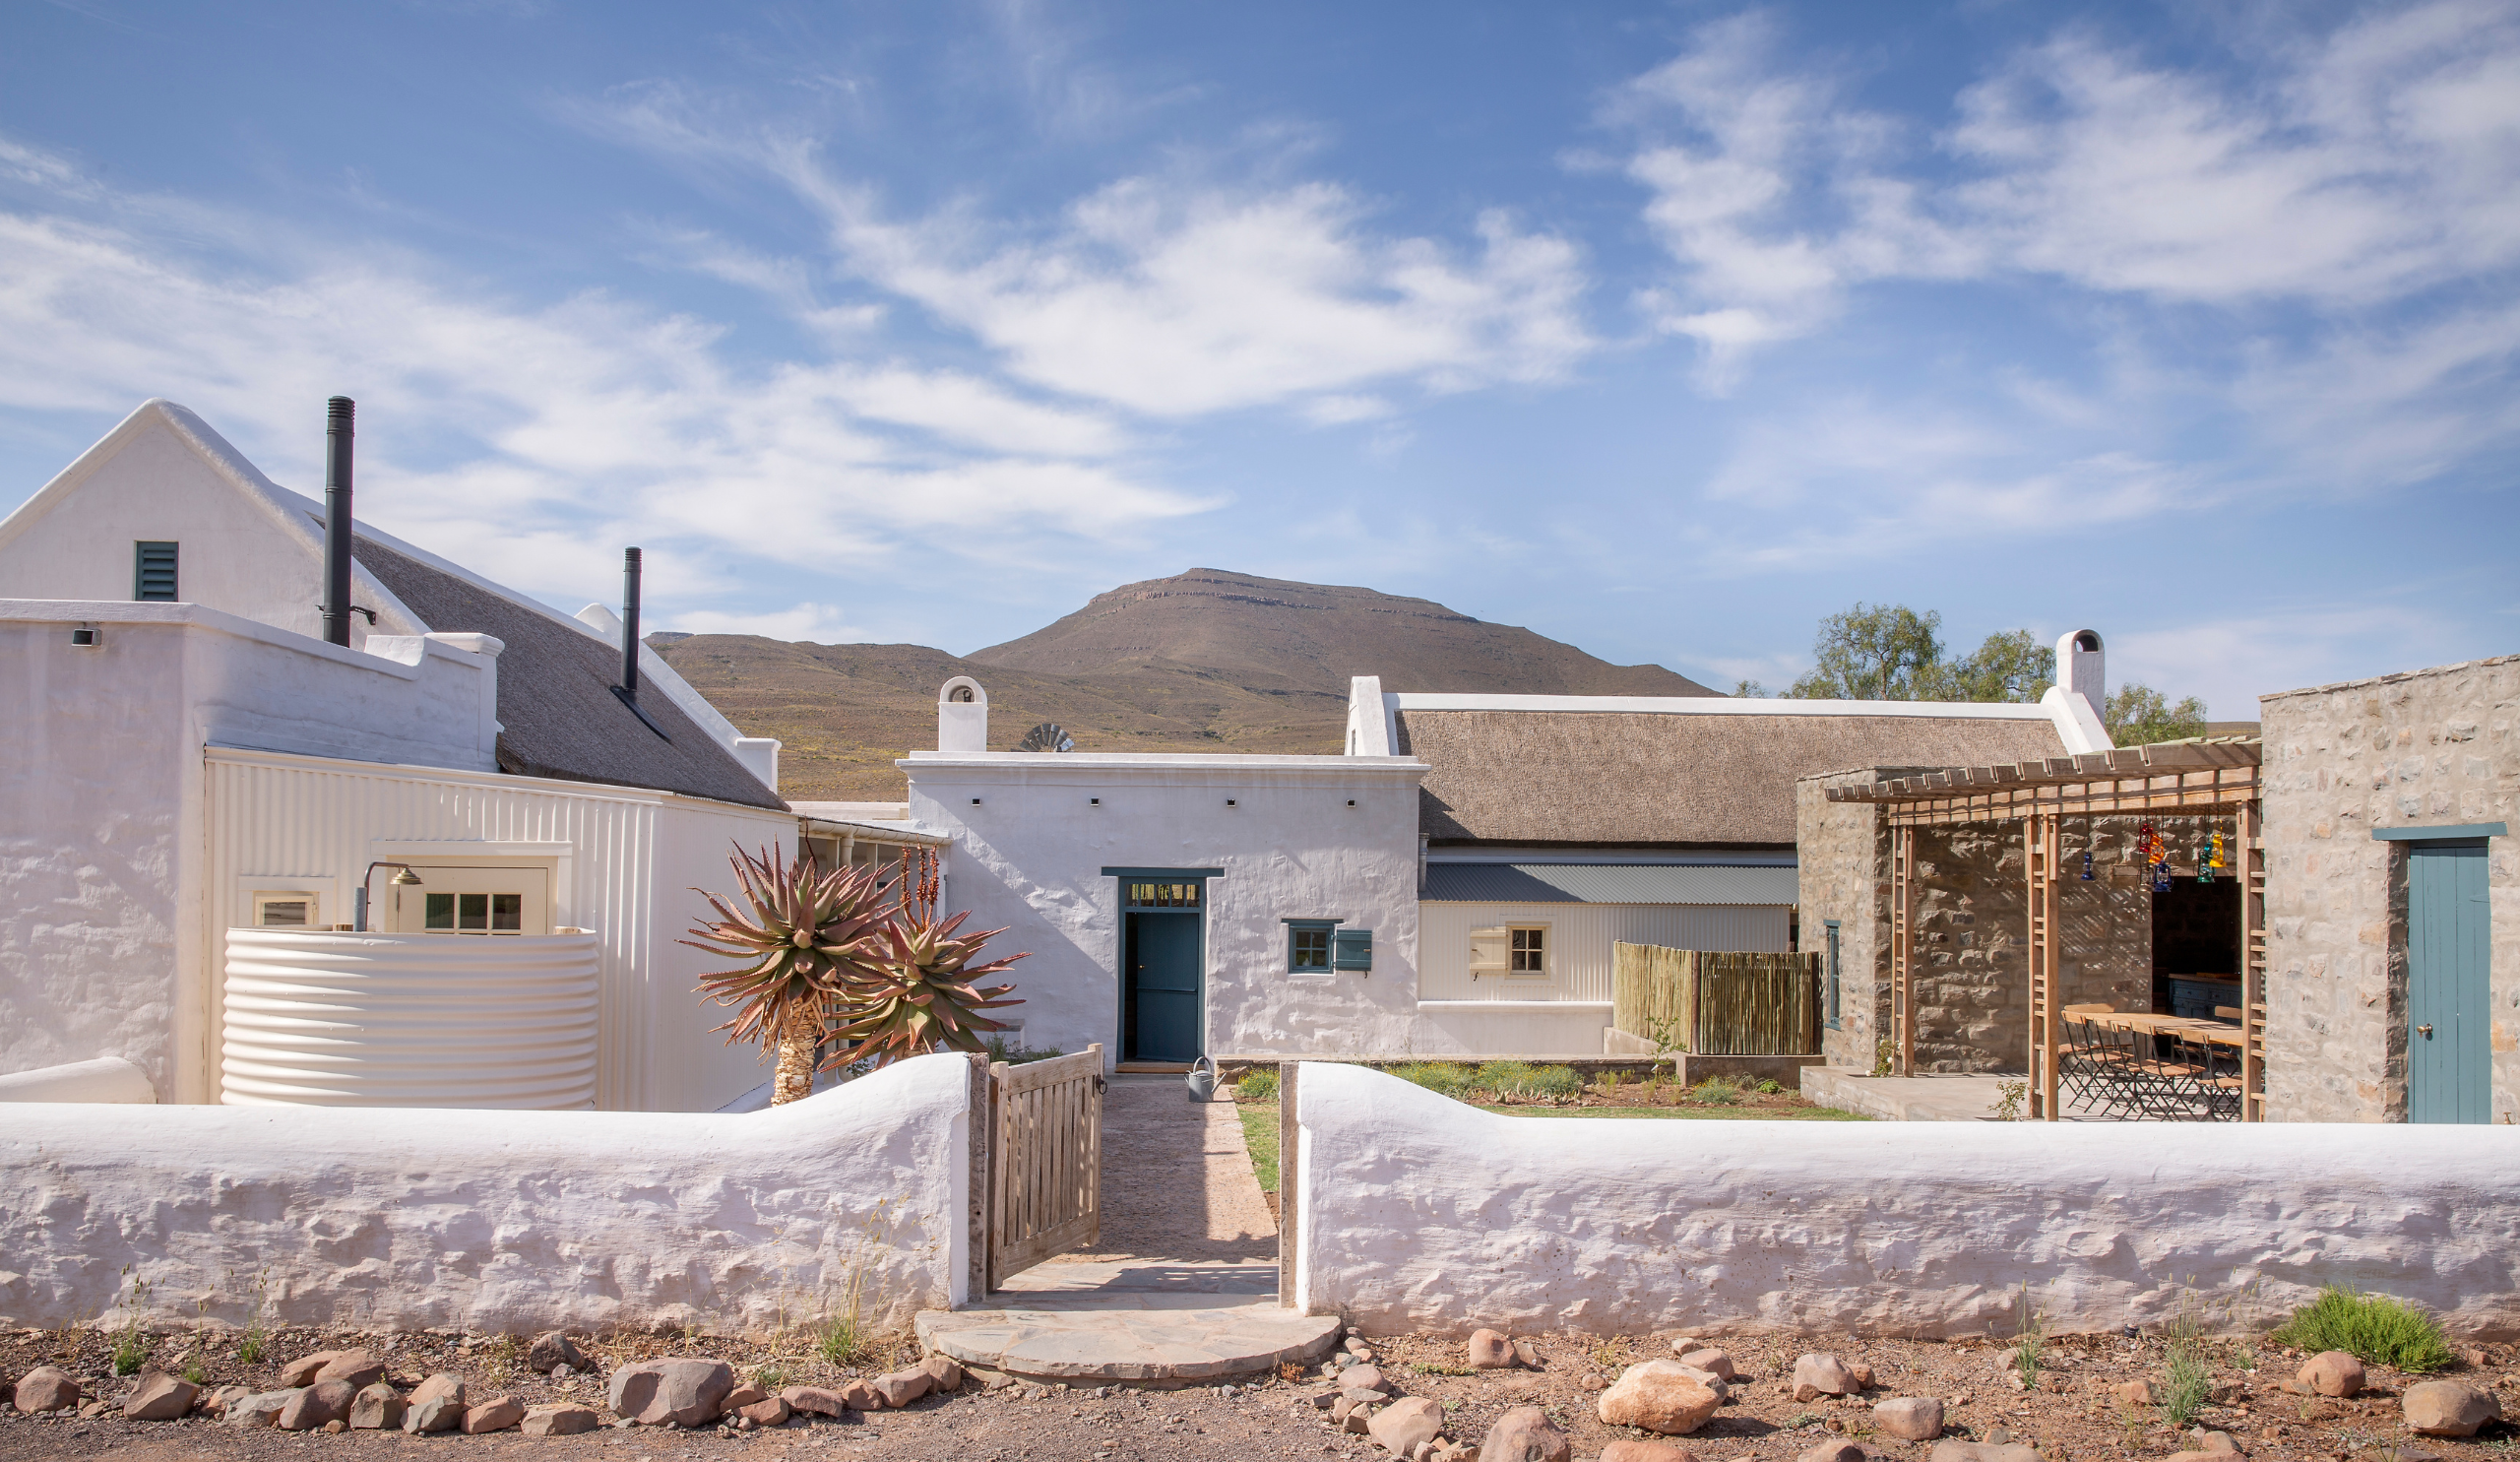 traditional Karoo architecture